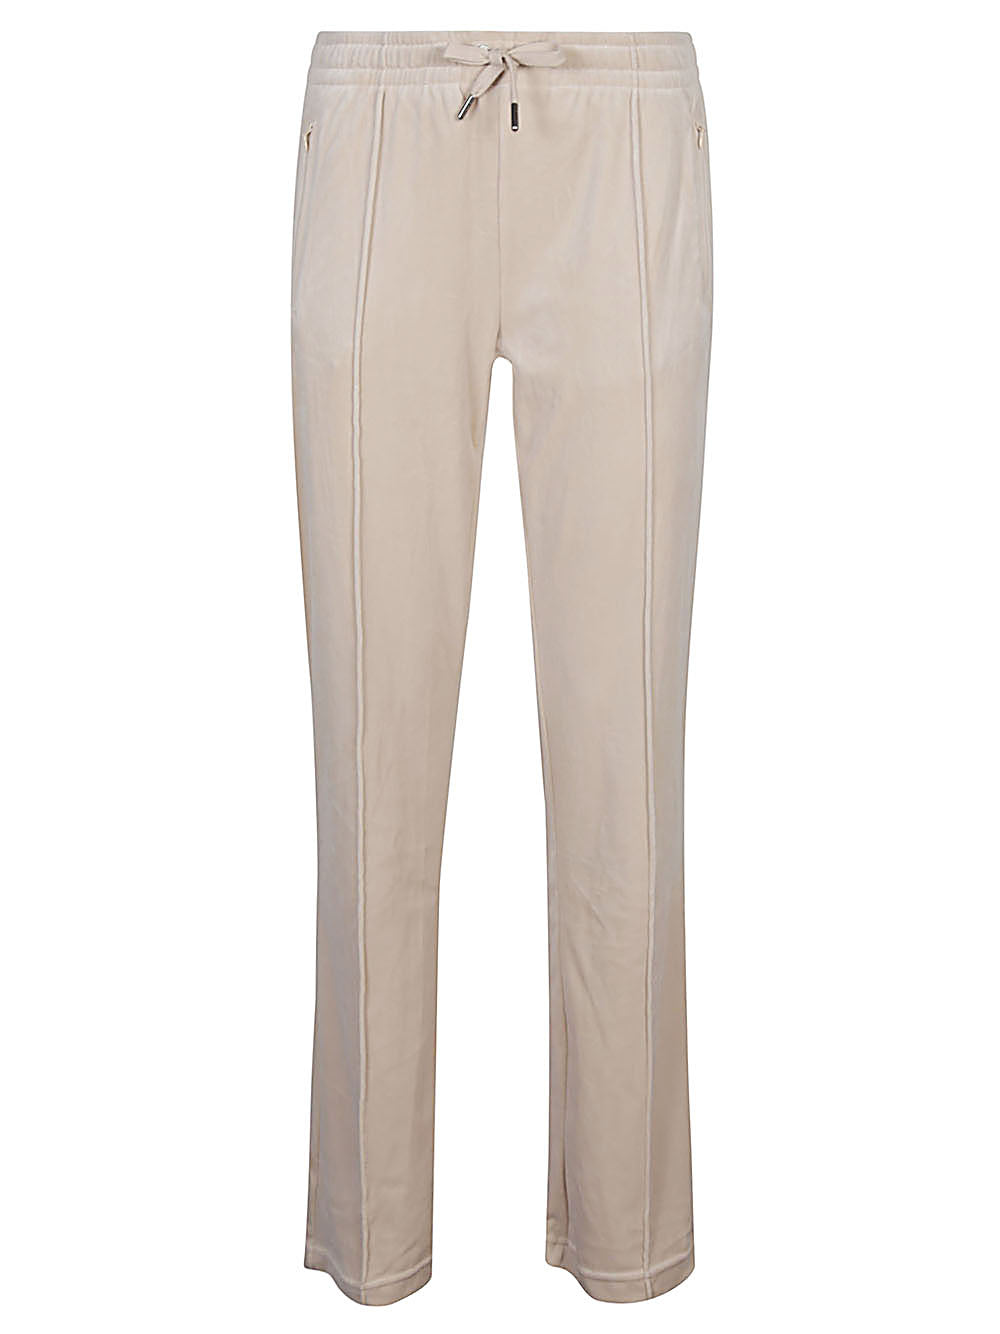 Juicy Couture Trousers Beige